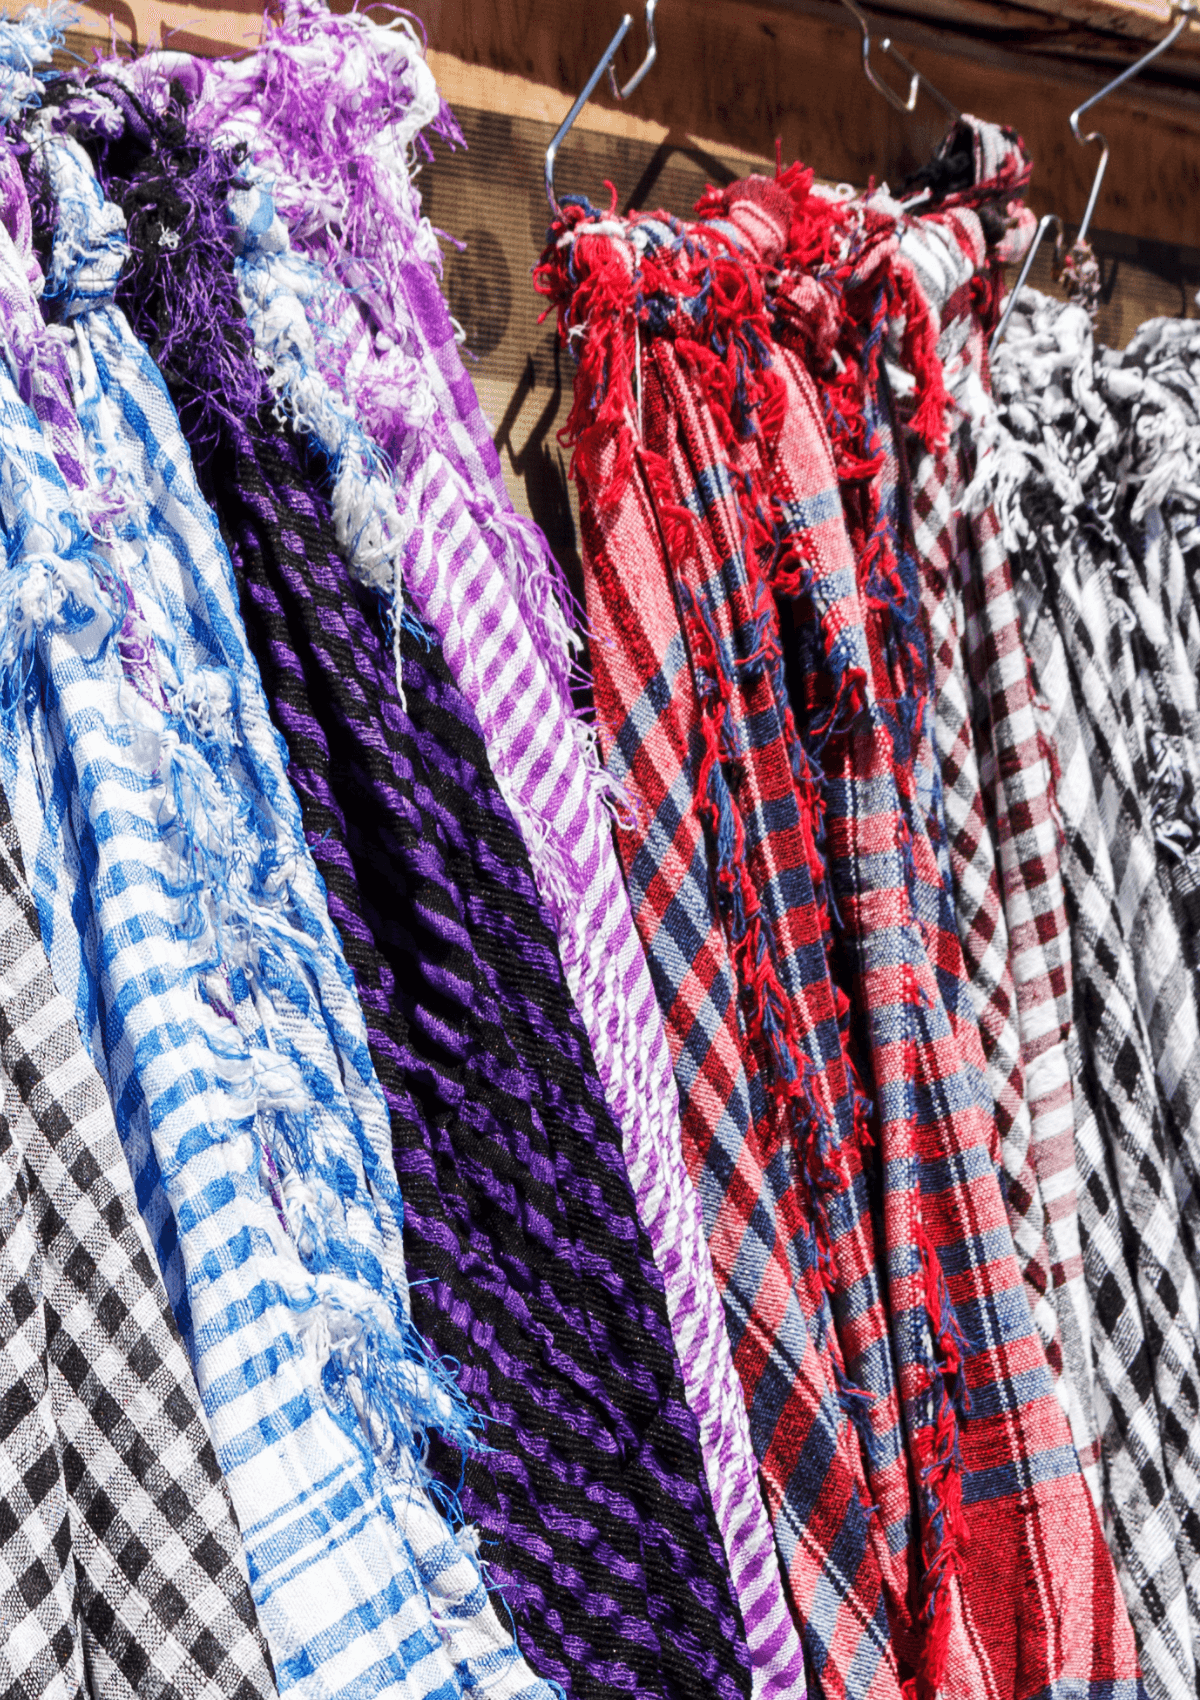 Keffiyeh's are typical souvenirs from Jordan